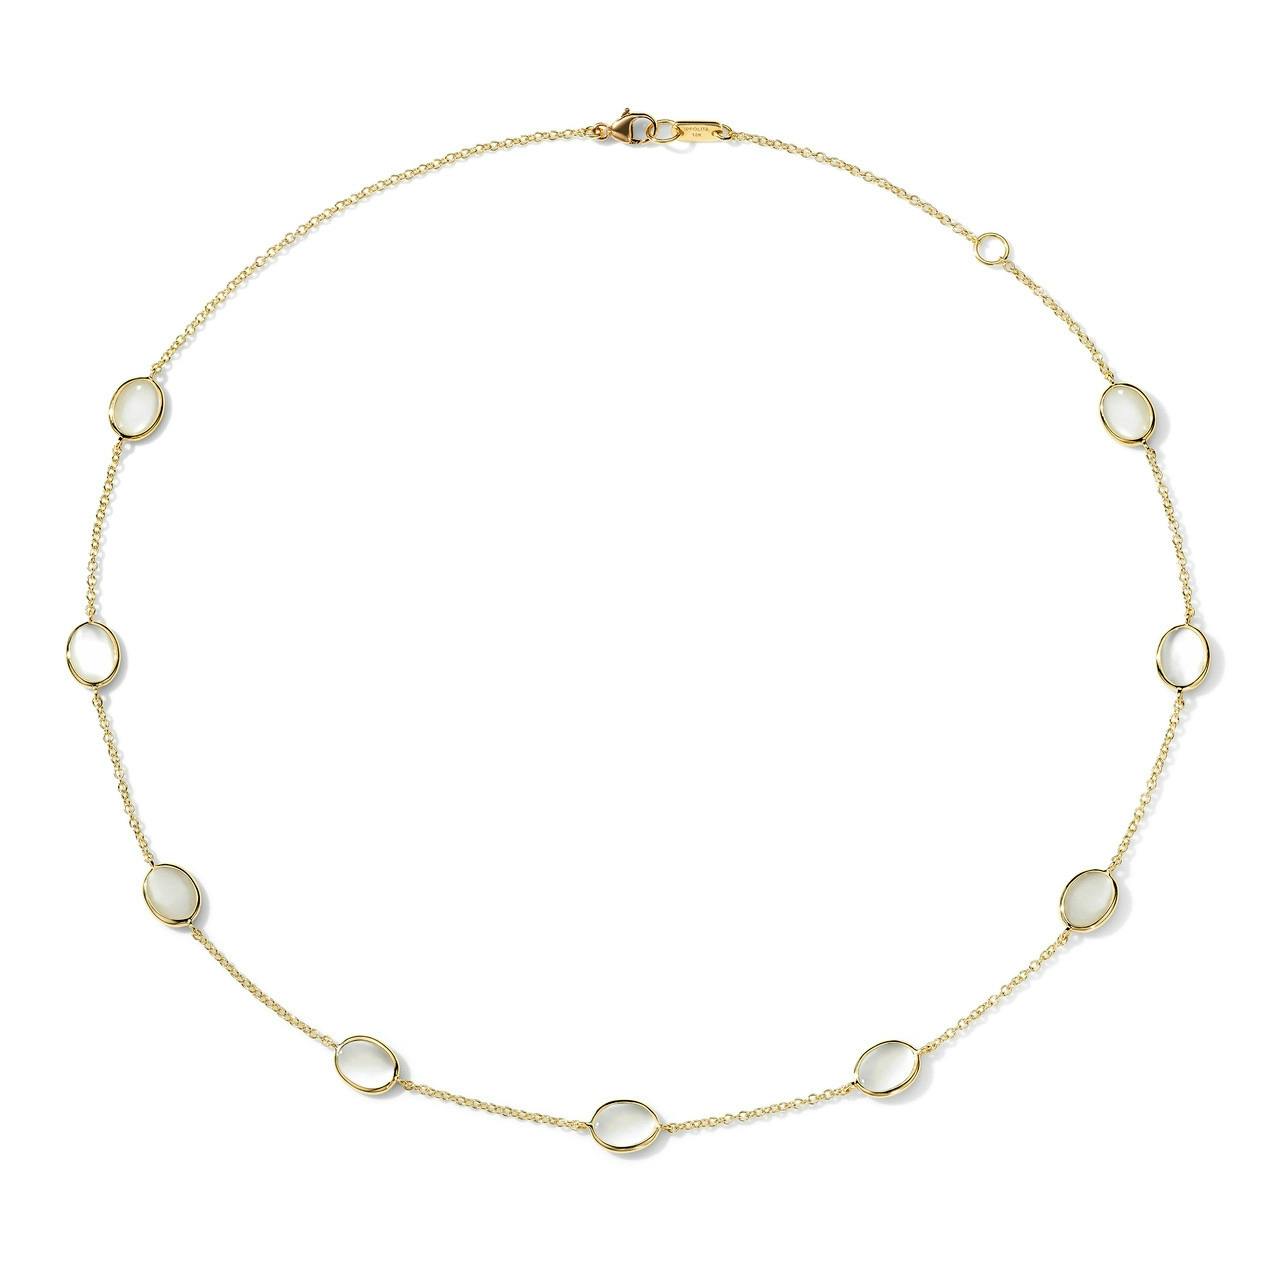 Ippolita 18k Polished Rock Candy Confetti Mother of Pearl Slice Necklace